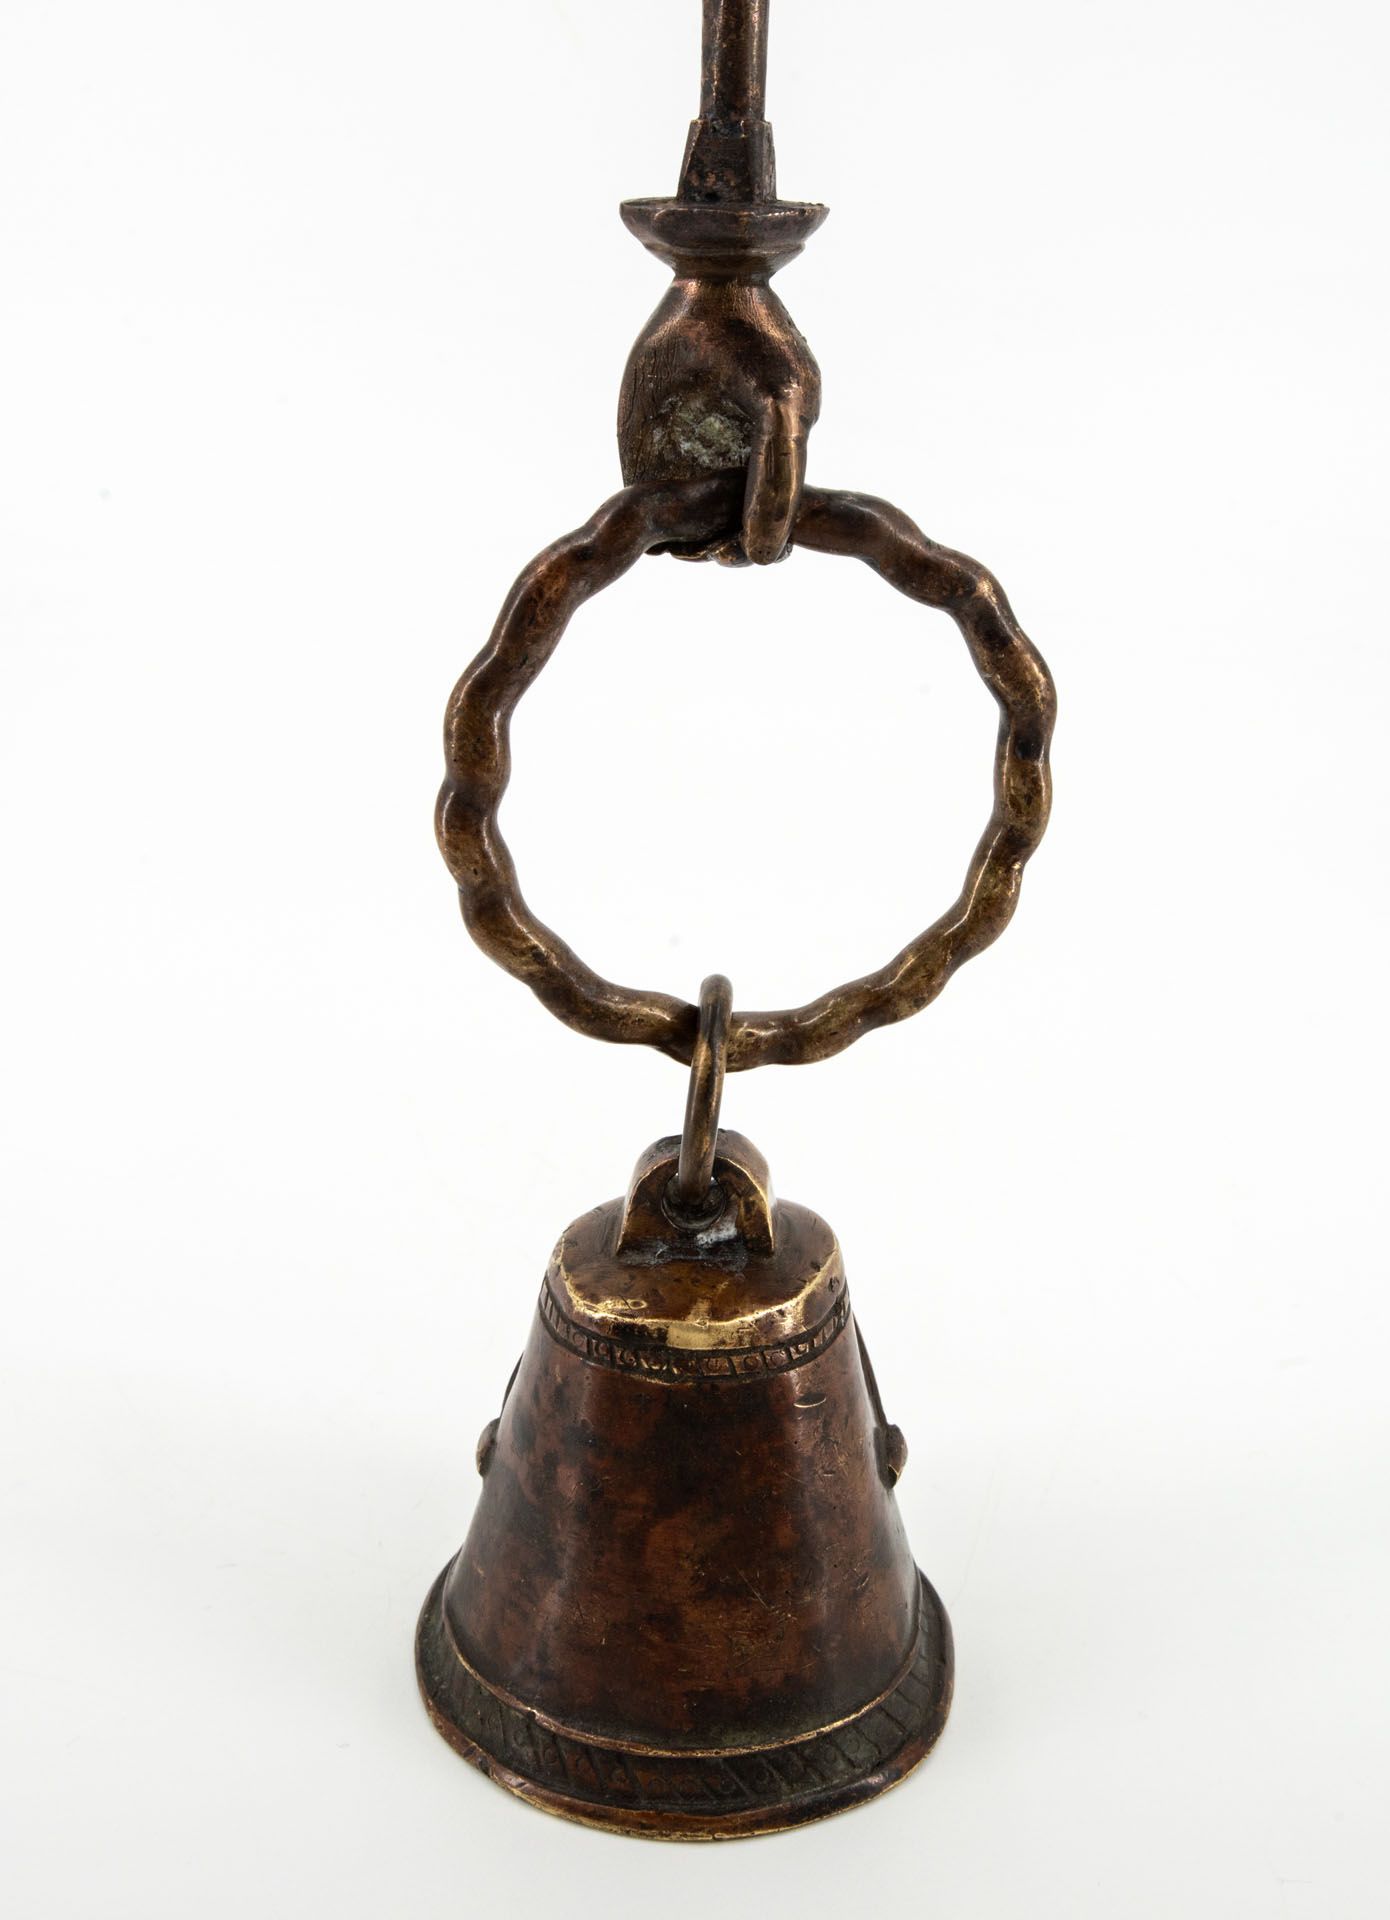 A Rare Renaissance Bronze Hand Bell, Germany, 1563 - Image 3 of 4